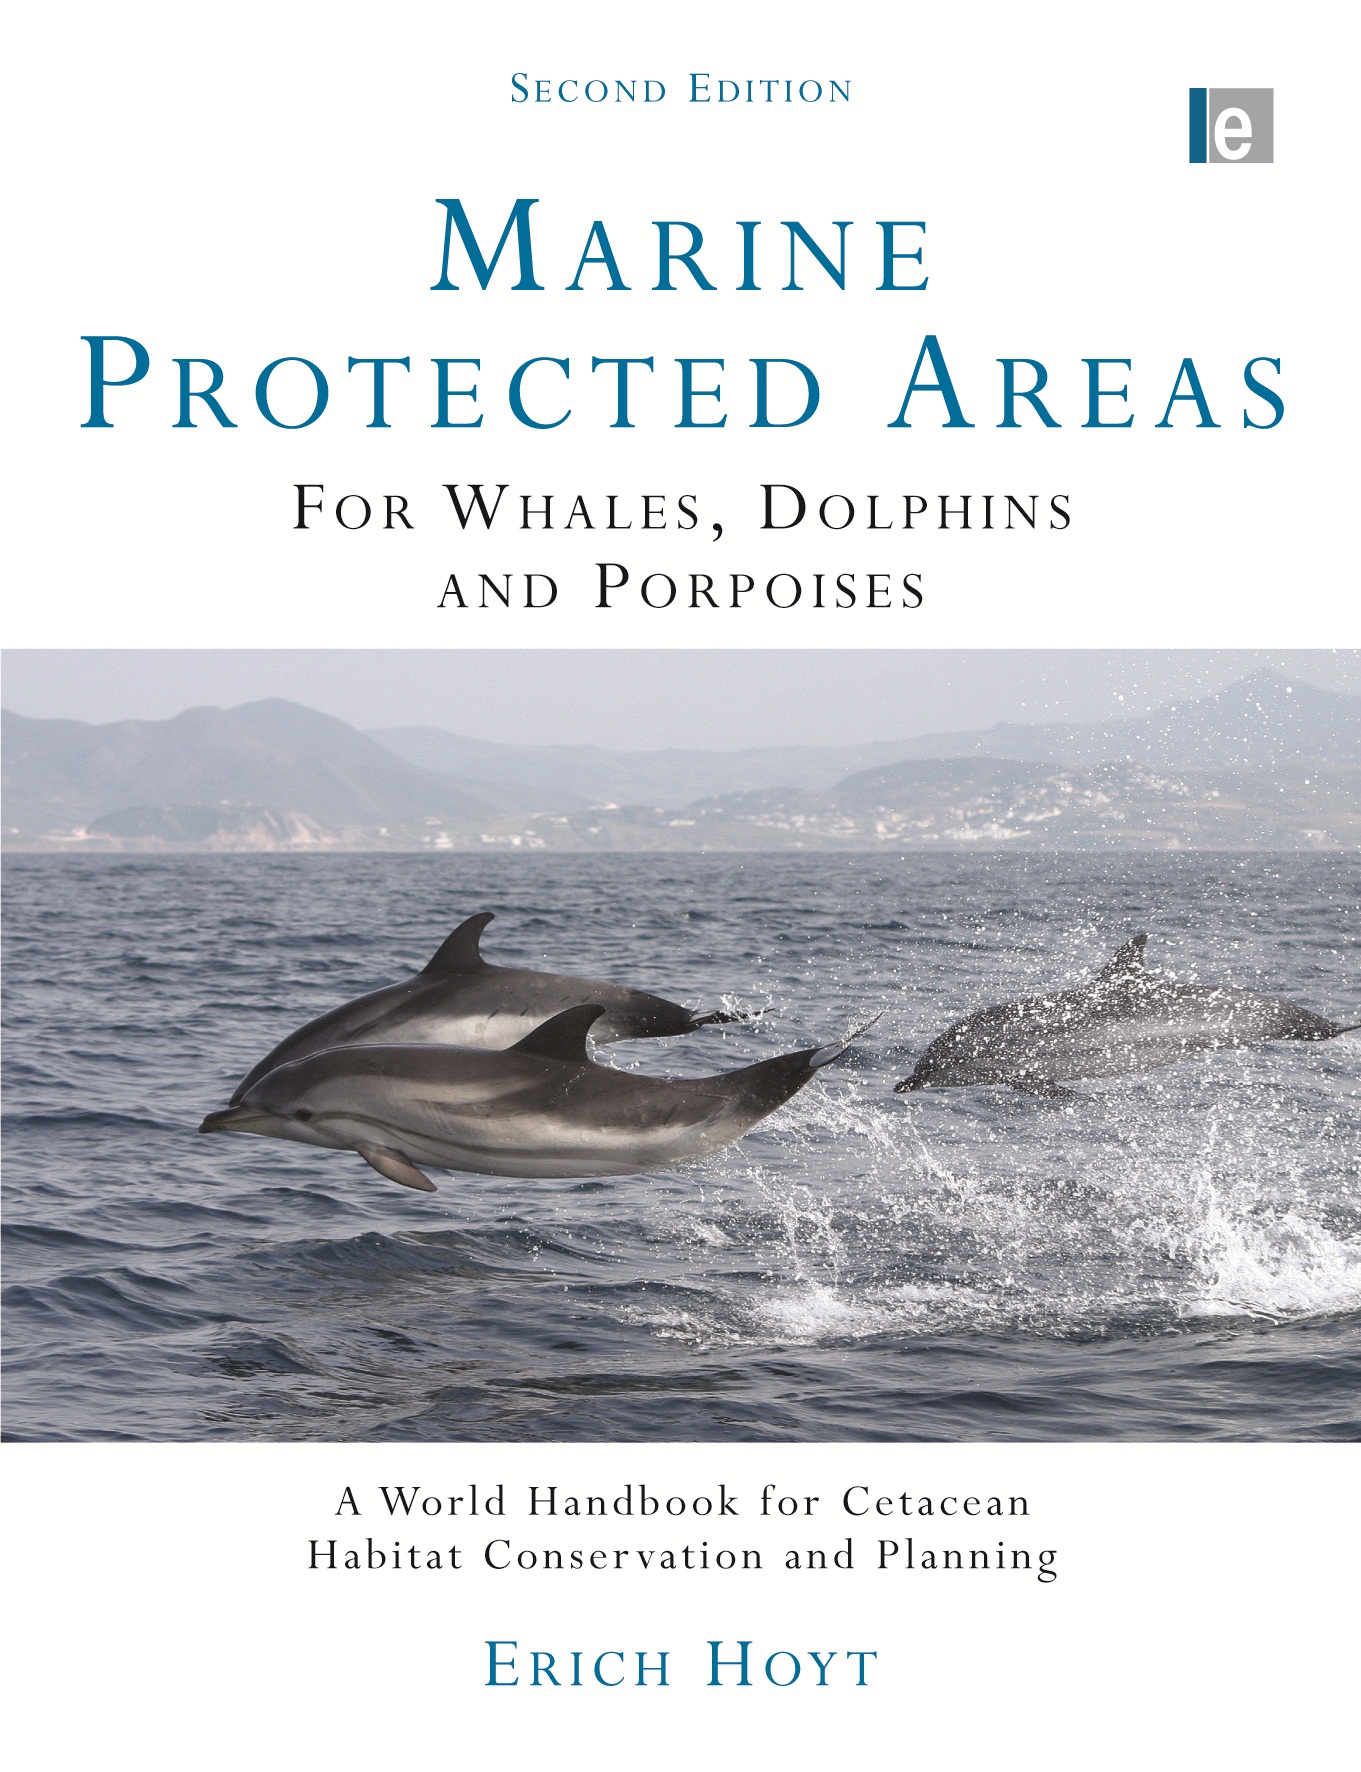 Marine Protected Areas for Whales, Dolphins and Porpoises.